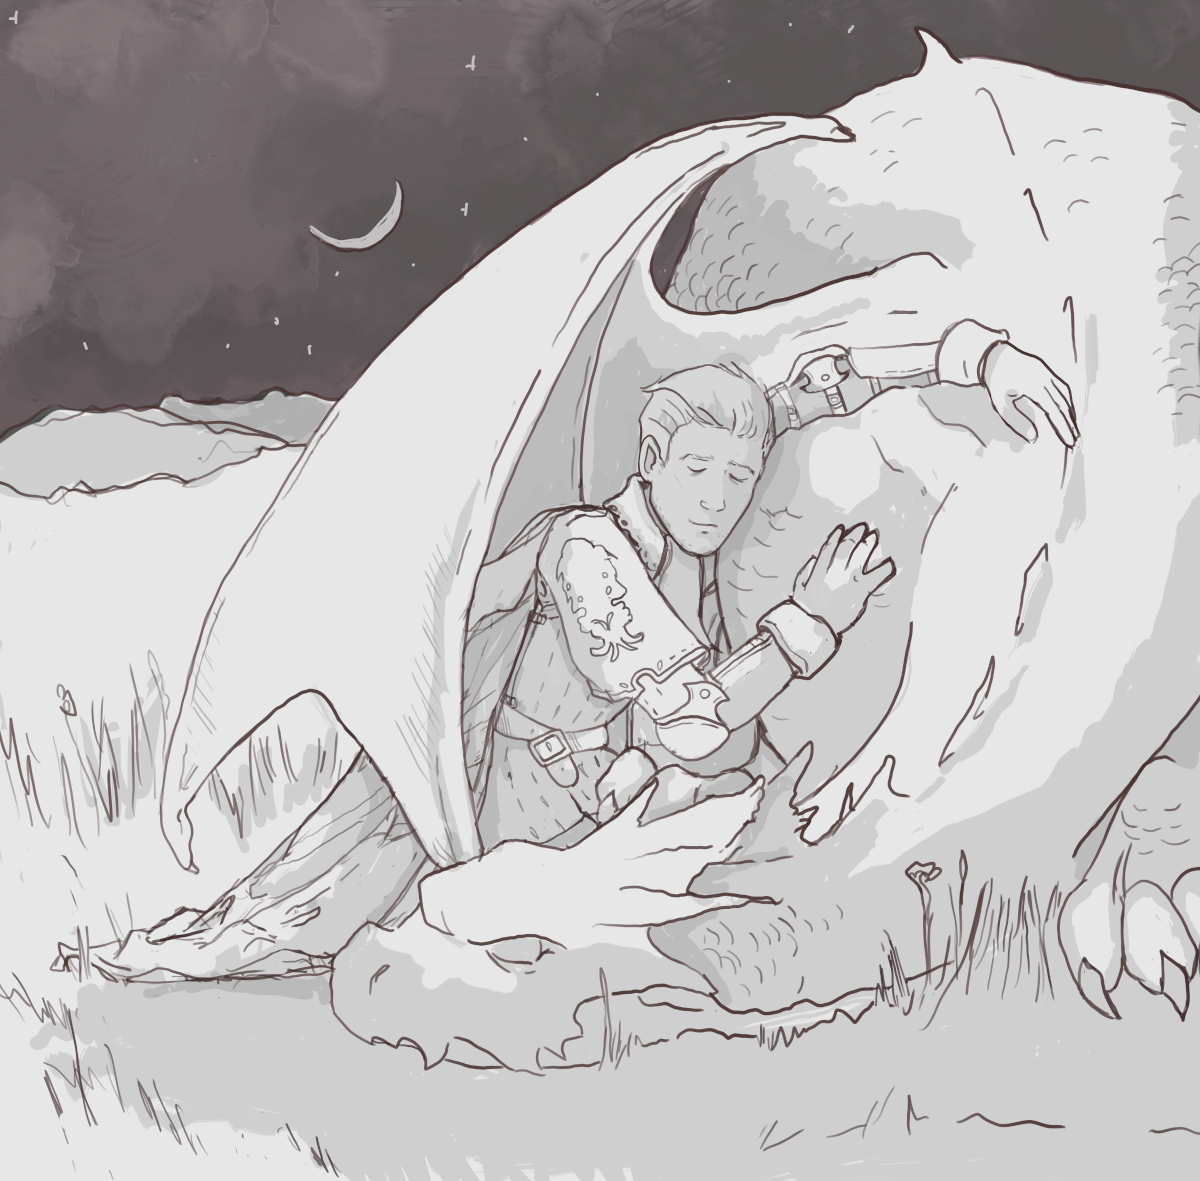 It is night. Beowulf Cadmus leans against the sleeping dragon form of Reis Duelar, his hands and face close against her skin. His eyes are closed, and he smiles very slightly.